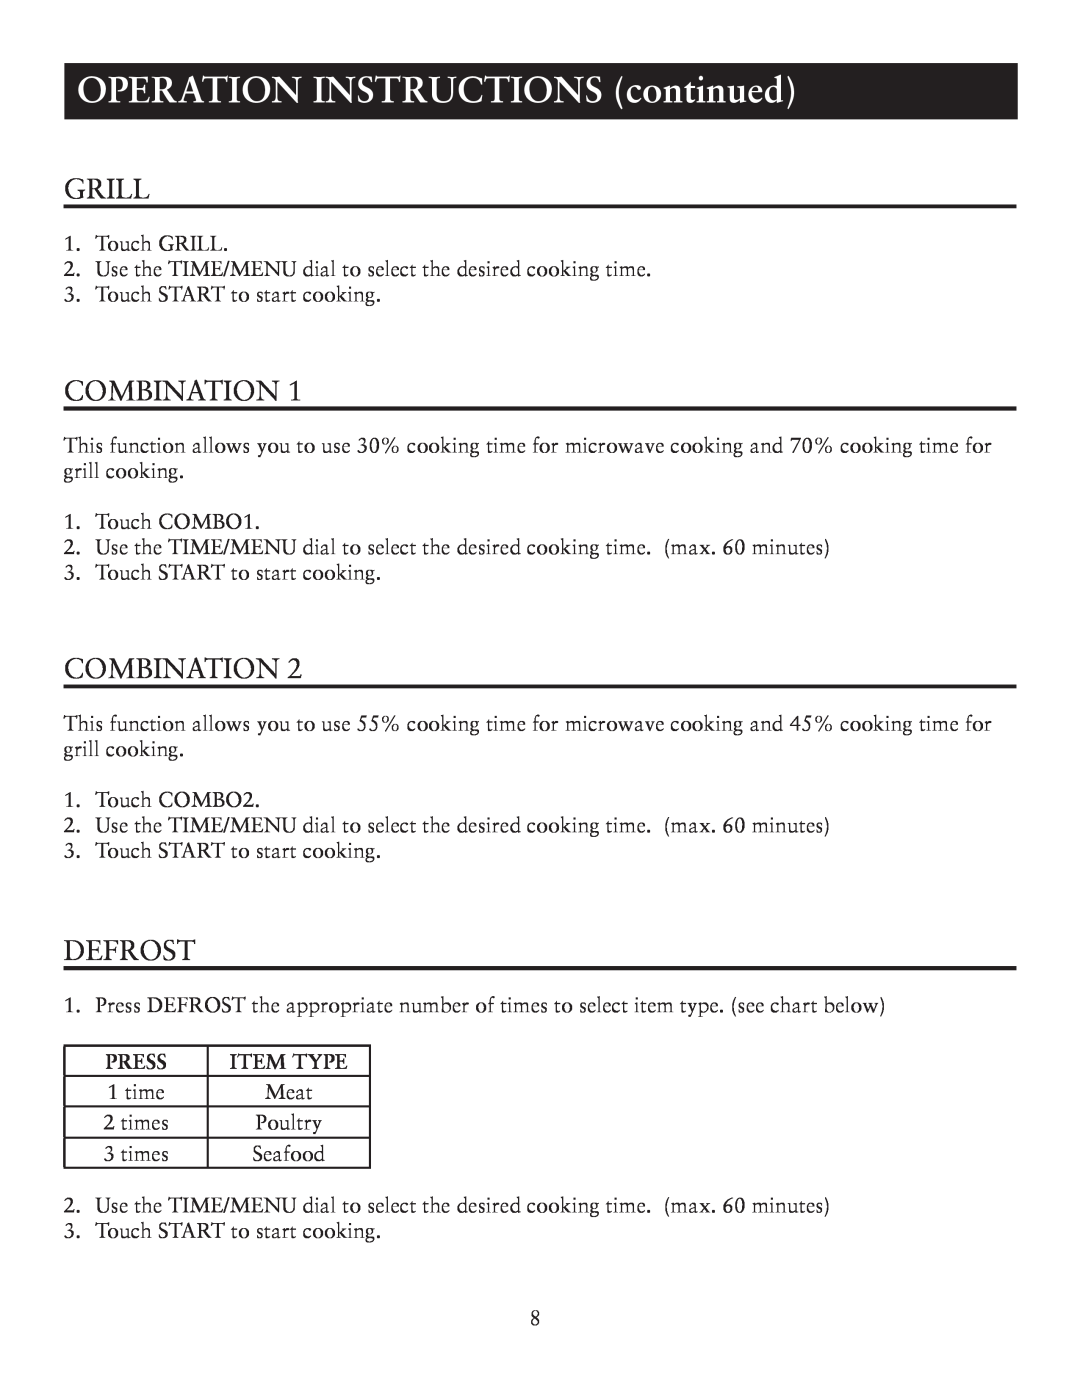 Oster OTM1101GBS user manual OPERATION INSTRUCTIONS continued, Grill, Combination, Defrost, Press, Item Type 